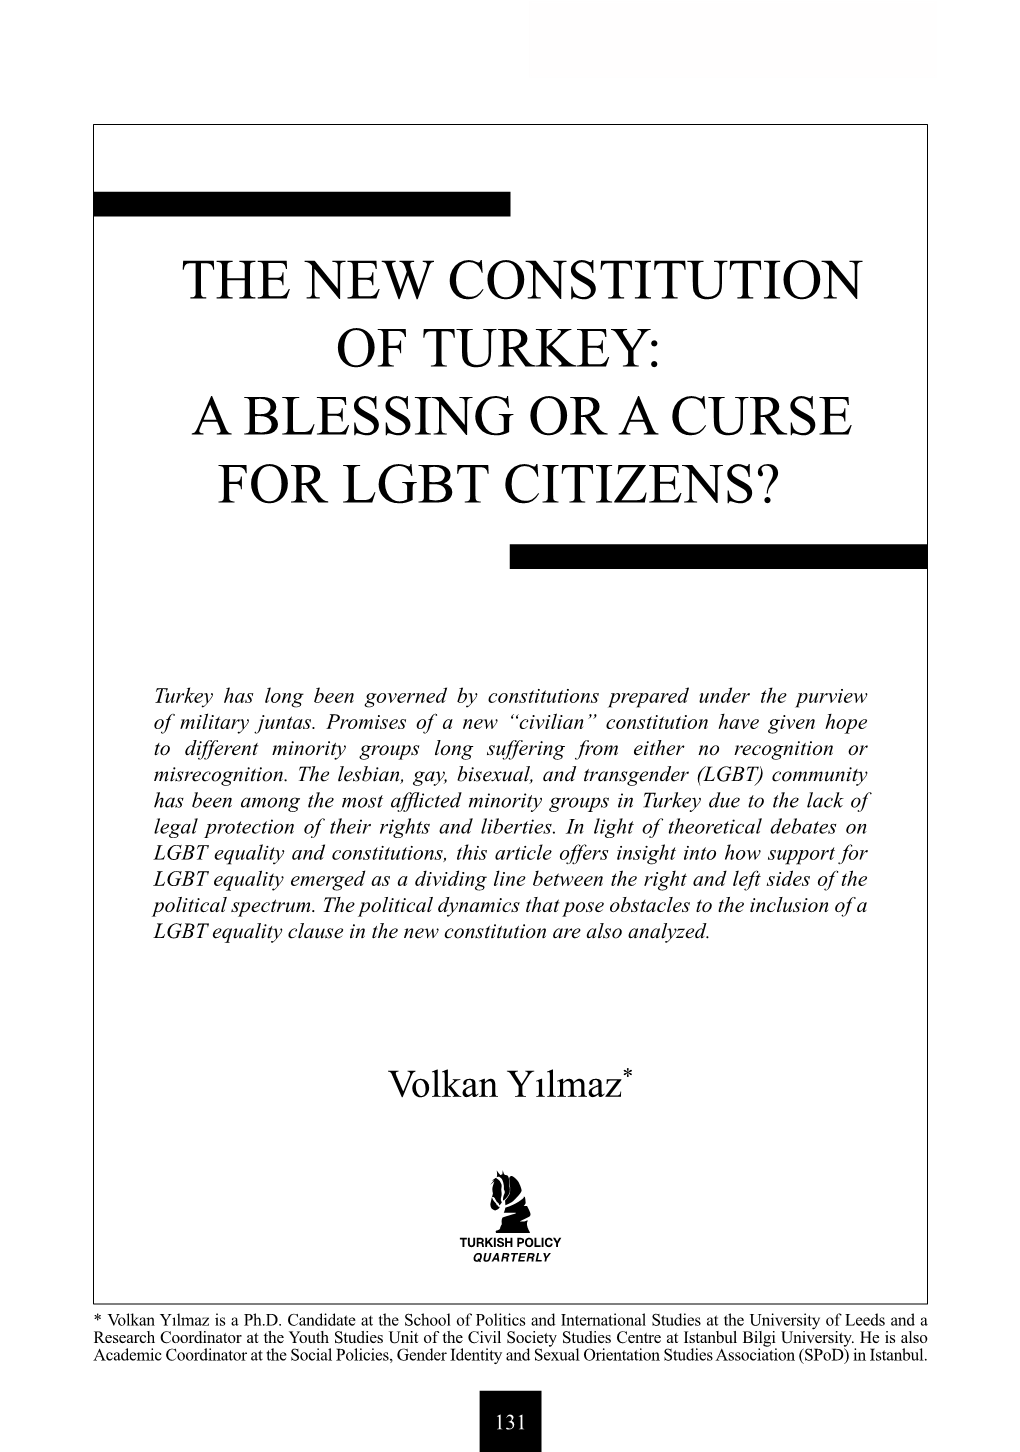 The New Constitution of Turkey: a Blessing Or a Curse for Lgbt Citizens?